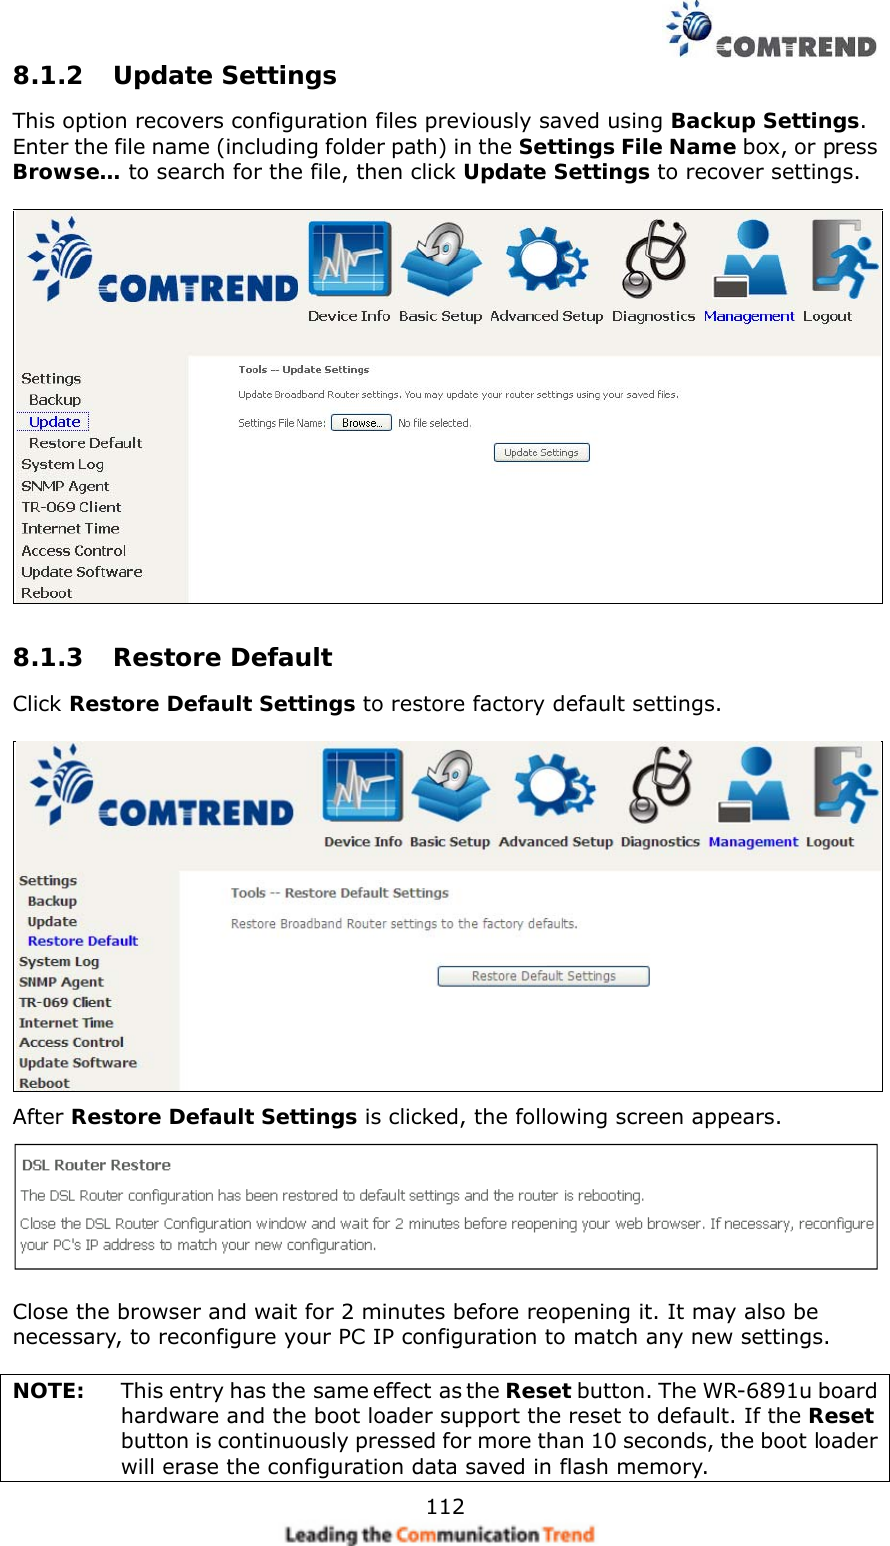    1128.1.2 Update Settings This option recovers configuration files previously saved using Backup Settings.  Enter the file name (including folder path) in the Settings File Name box, or press Browse… to search for the file, then click Update Settings to recover settings.   8.1.3 Restore Default Click Restore Default Settings to restore factory default settings.   After Restore Default Settings is clicked, the following screen appears.     Close the browser and wait for 2 minutes before reopening it. It may also be necessary, to reconfigure your PC IP configuration to match any new settings.  NOTE:    This entry has the same effect as the Reset button. The WR-6891u board hardware and the boot loader support the reset to default. If the Reset button is continuously pressed for more than 10 seconds, the boot loader will erase the configuration data saved in flash memory. 